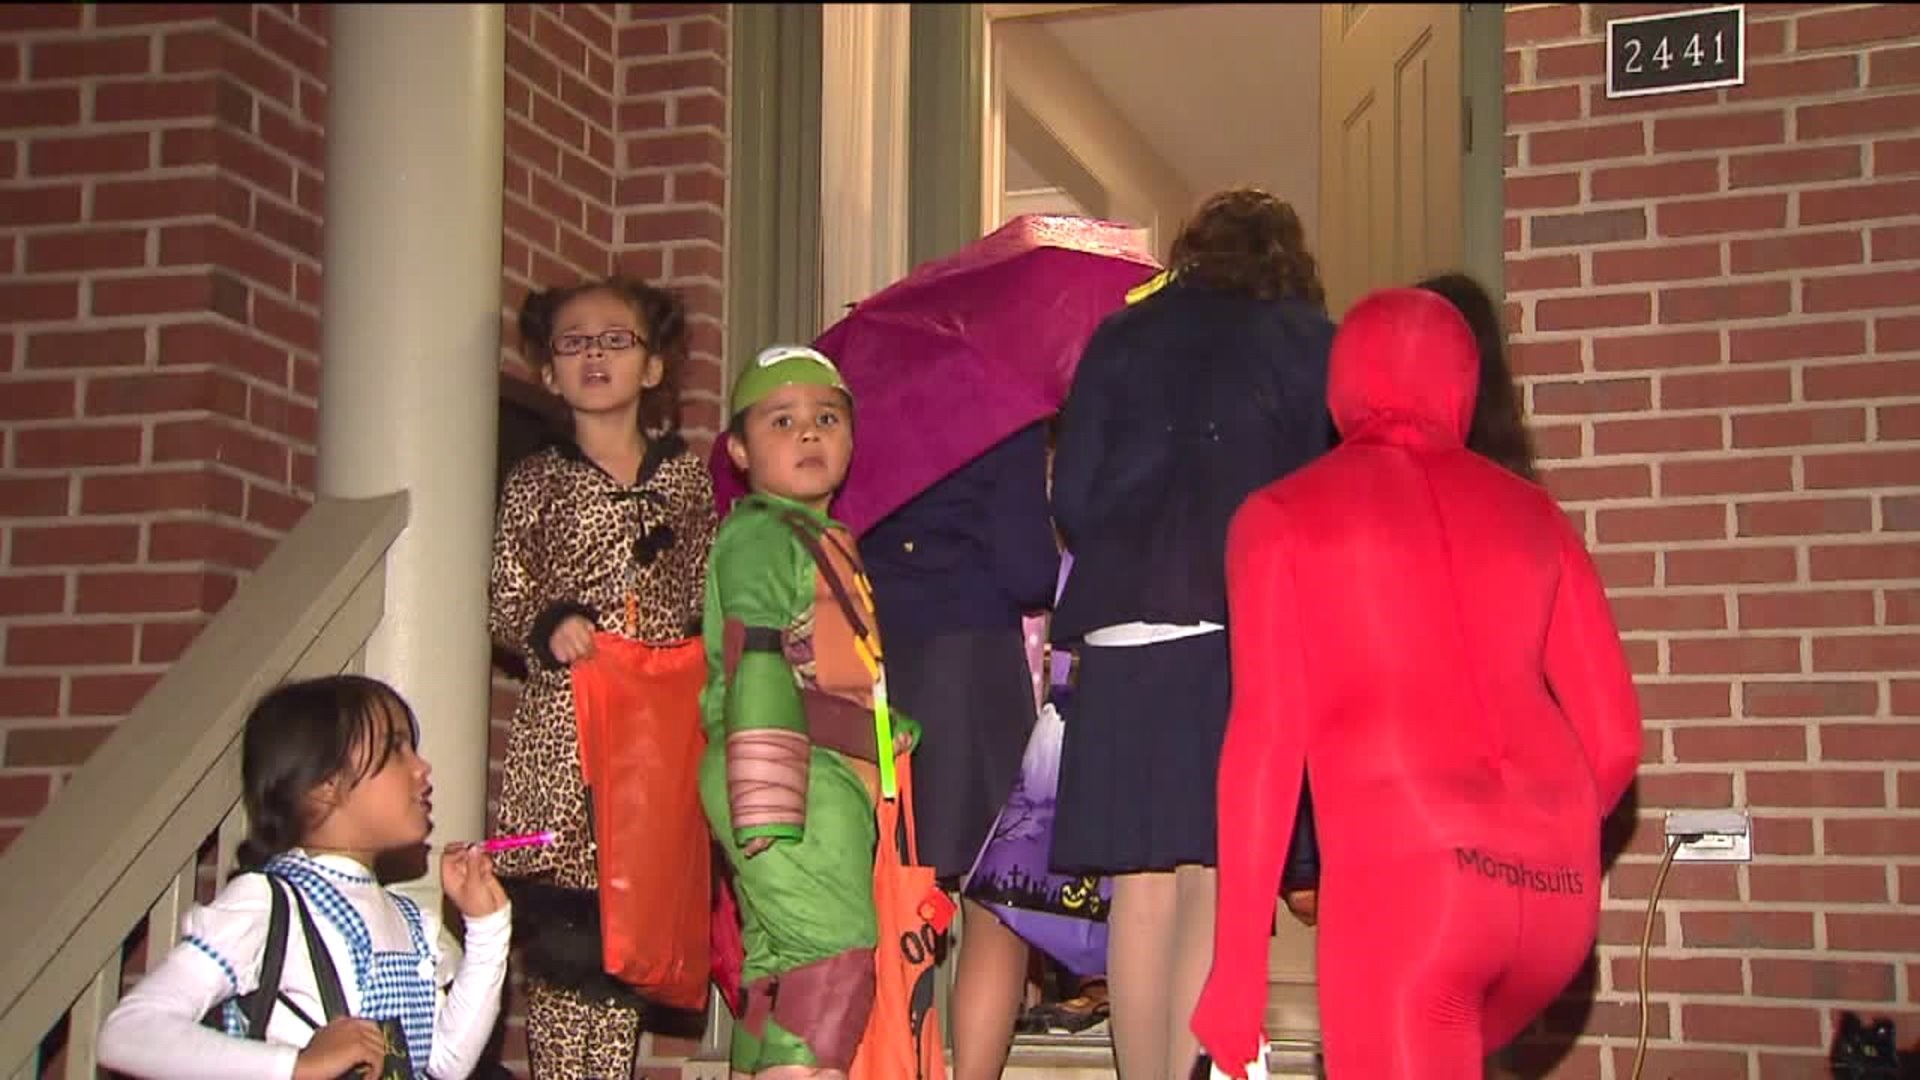 Frightful Forecast Changes Halloween Plans